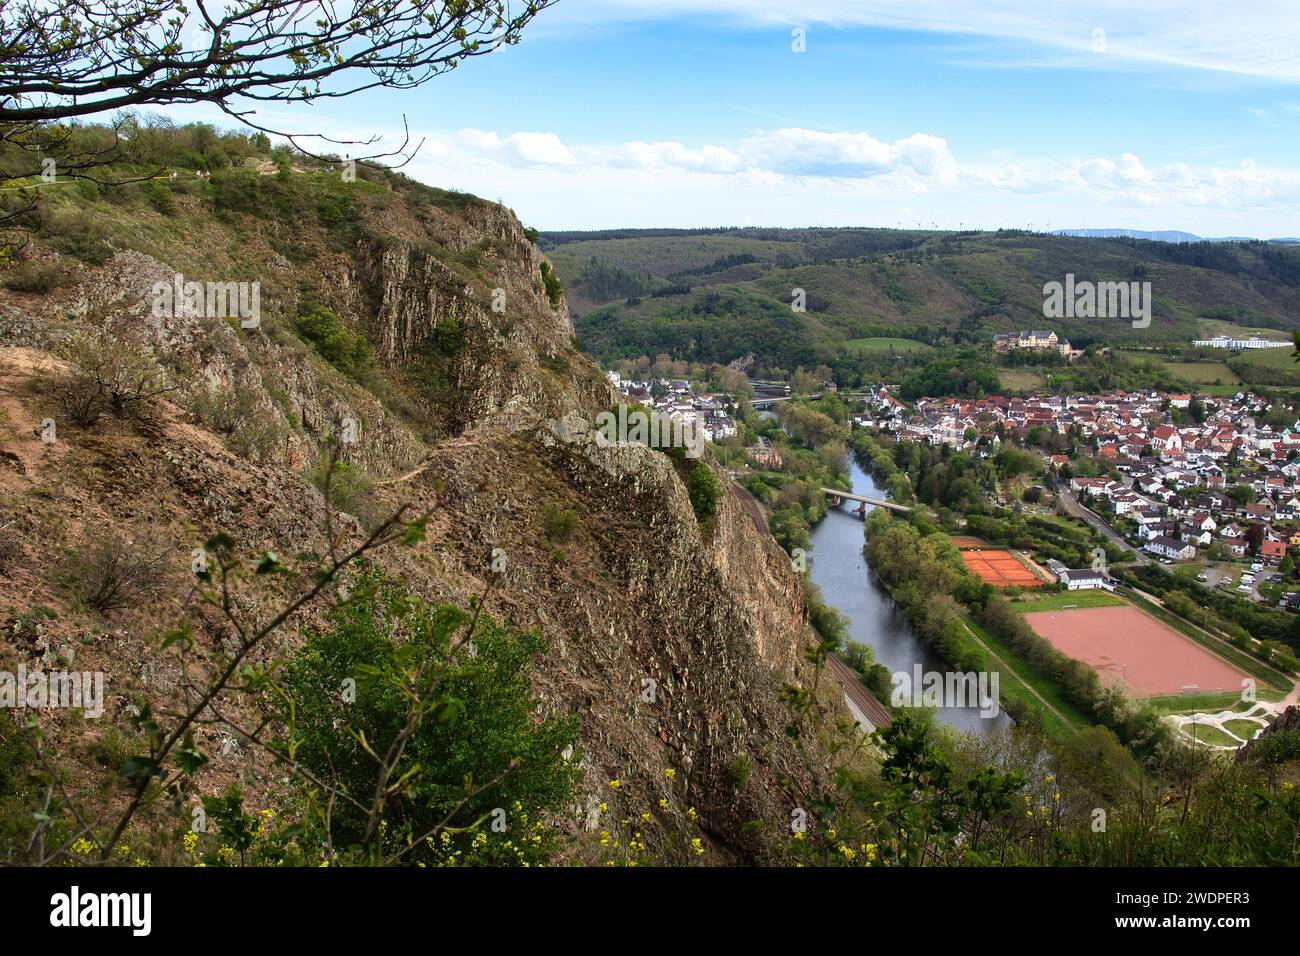 Bad Munster, Germany - May 9, 2021: Cliff in Rotenfels overlooking the Nahe River and Bad Munster, Germany on a spring day. Stock Photo